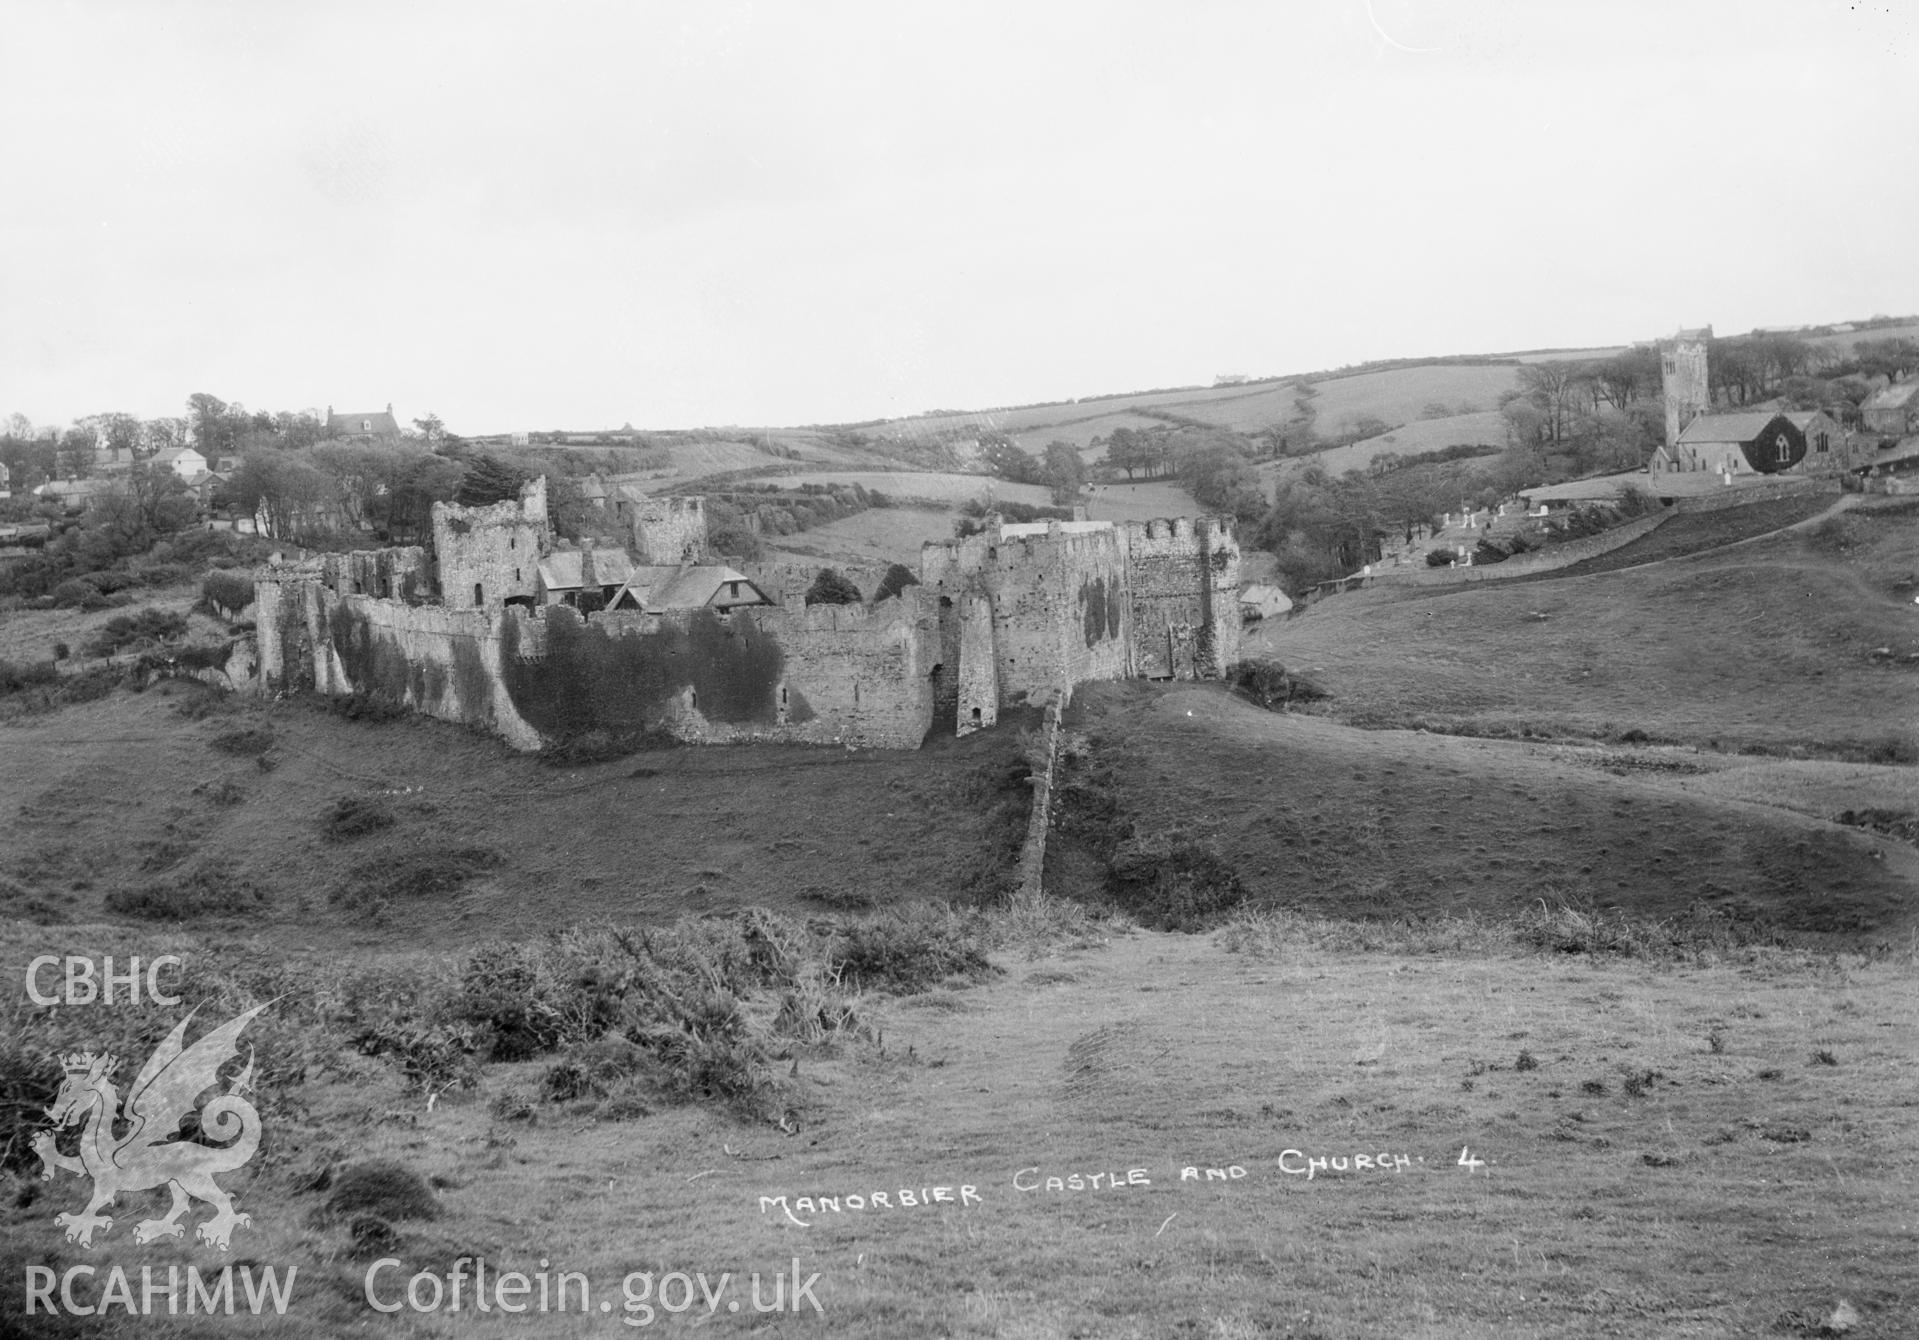 Landscape view of Manorbier Castle and Church, Pembs W A Call, taken1930.